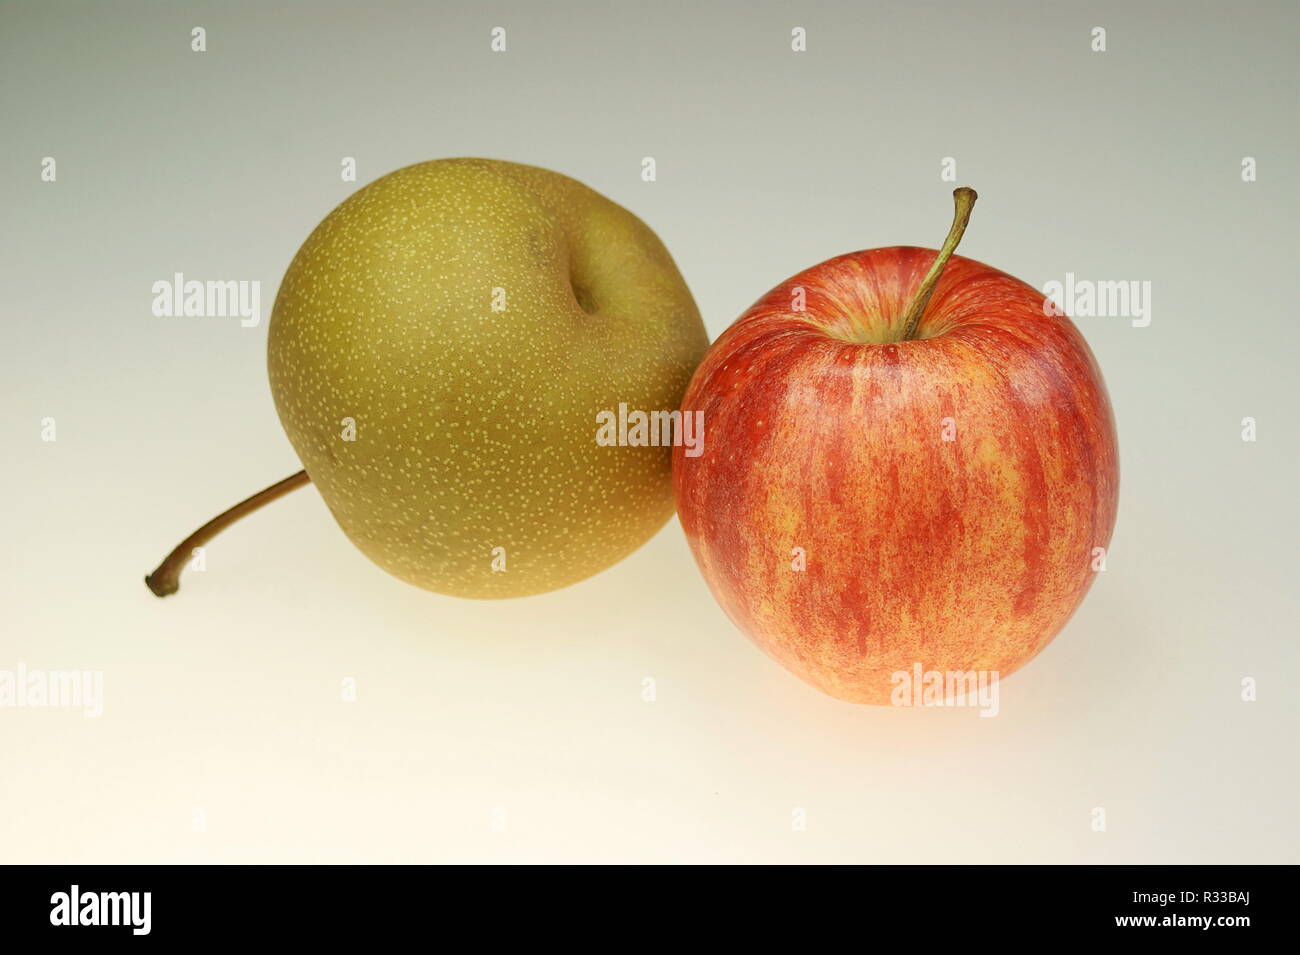 nashi pear with red apple Stock Photo